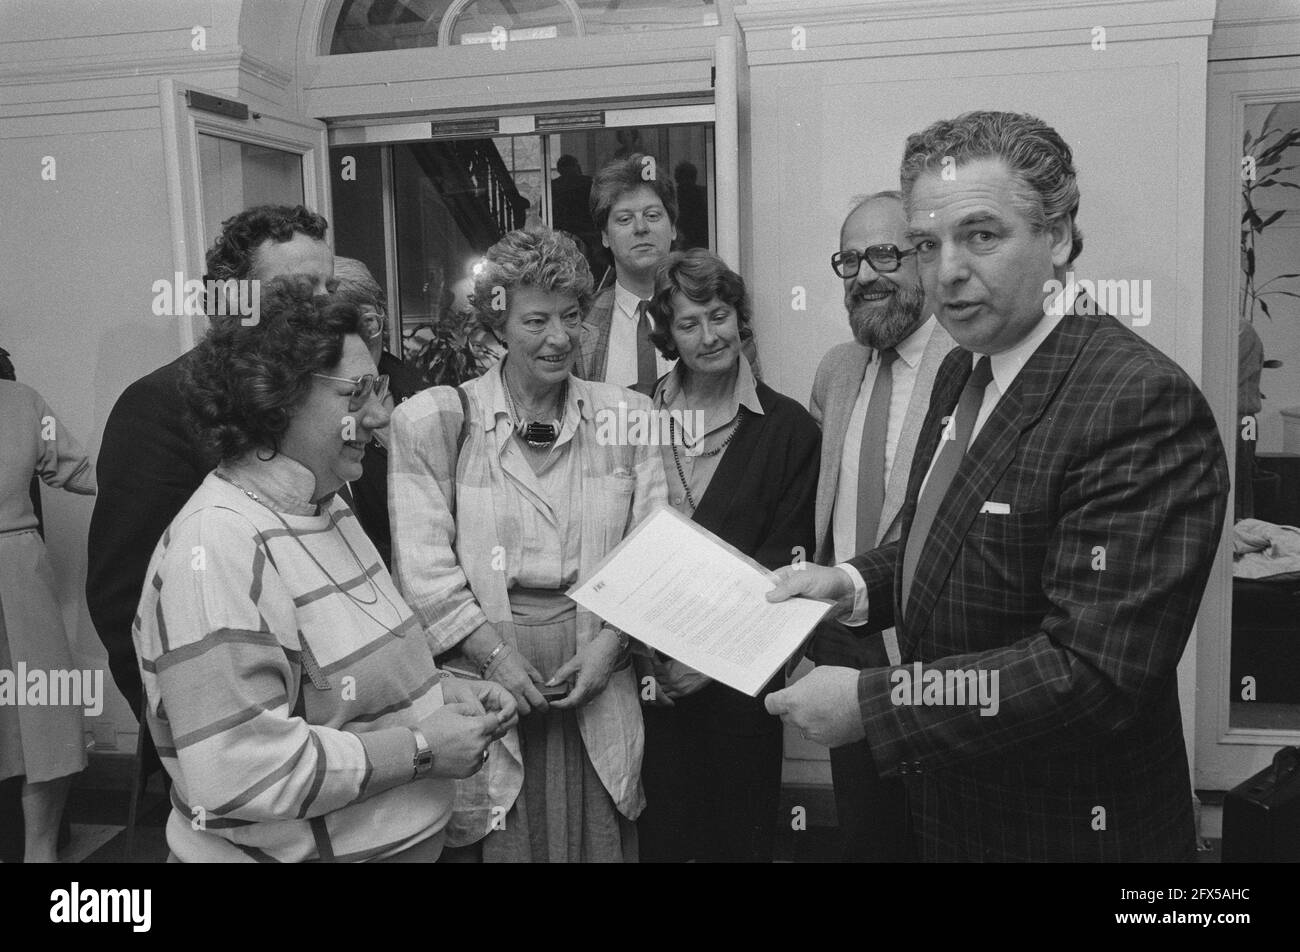 FNV offers petition in The Hague to Kamercie. Volksgezondheid i.v.m. wijziging ziektekostenverzekeringe v.l.n.r. Haas Berger, Muller, Beckers and FNV president, June 22, 1987, chamber commissions, petitions, The Netherlands, 20th century press agency photo, news to remember, documentary, historic photography 1945-1990, visual stories, human history of the Twentieth Century, capturing moments in time Stock Photo